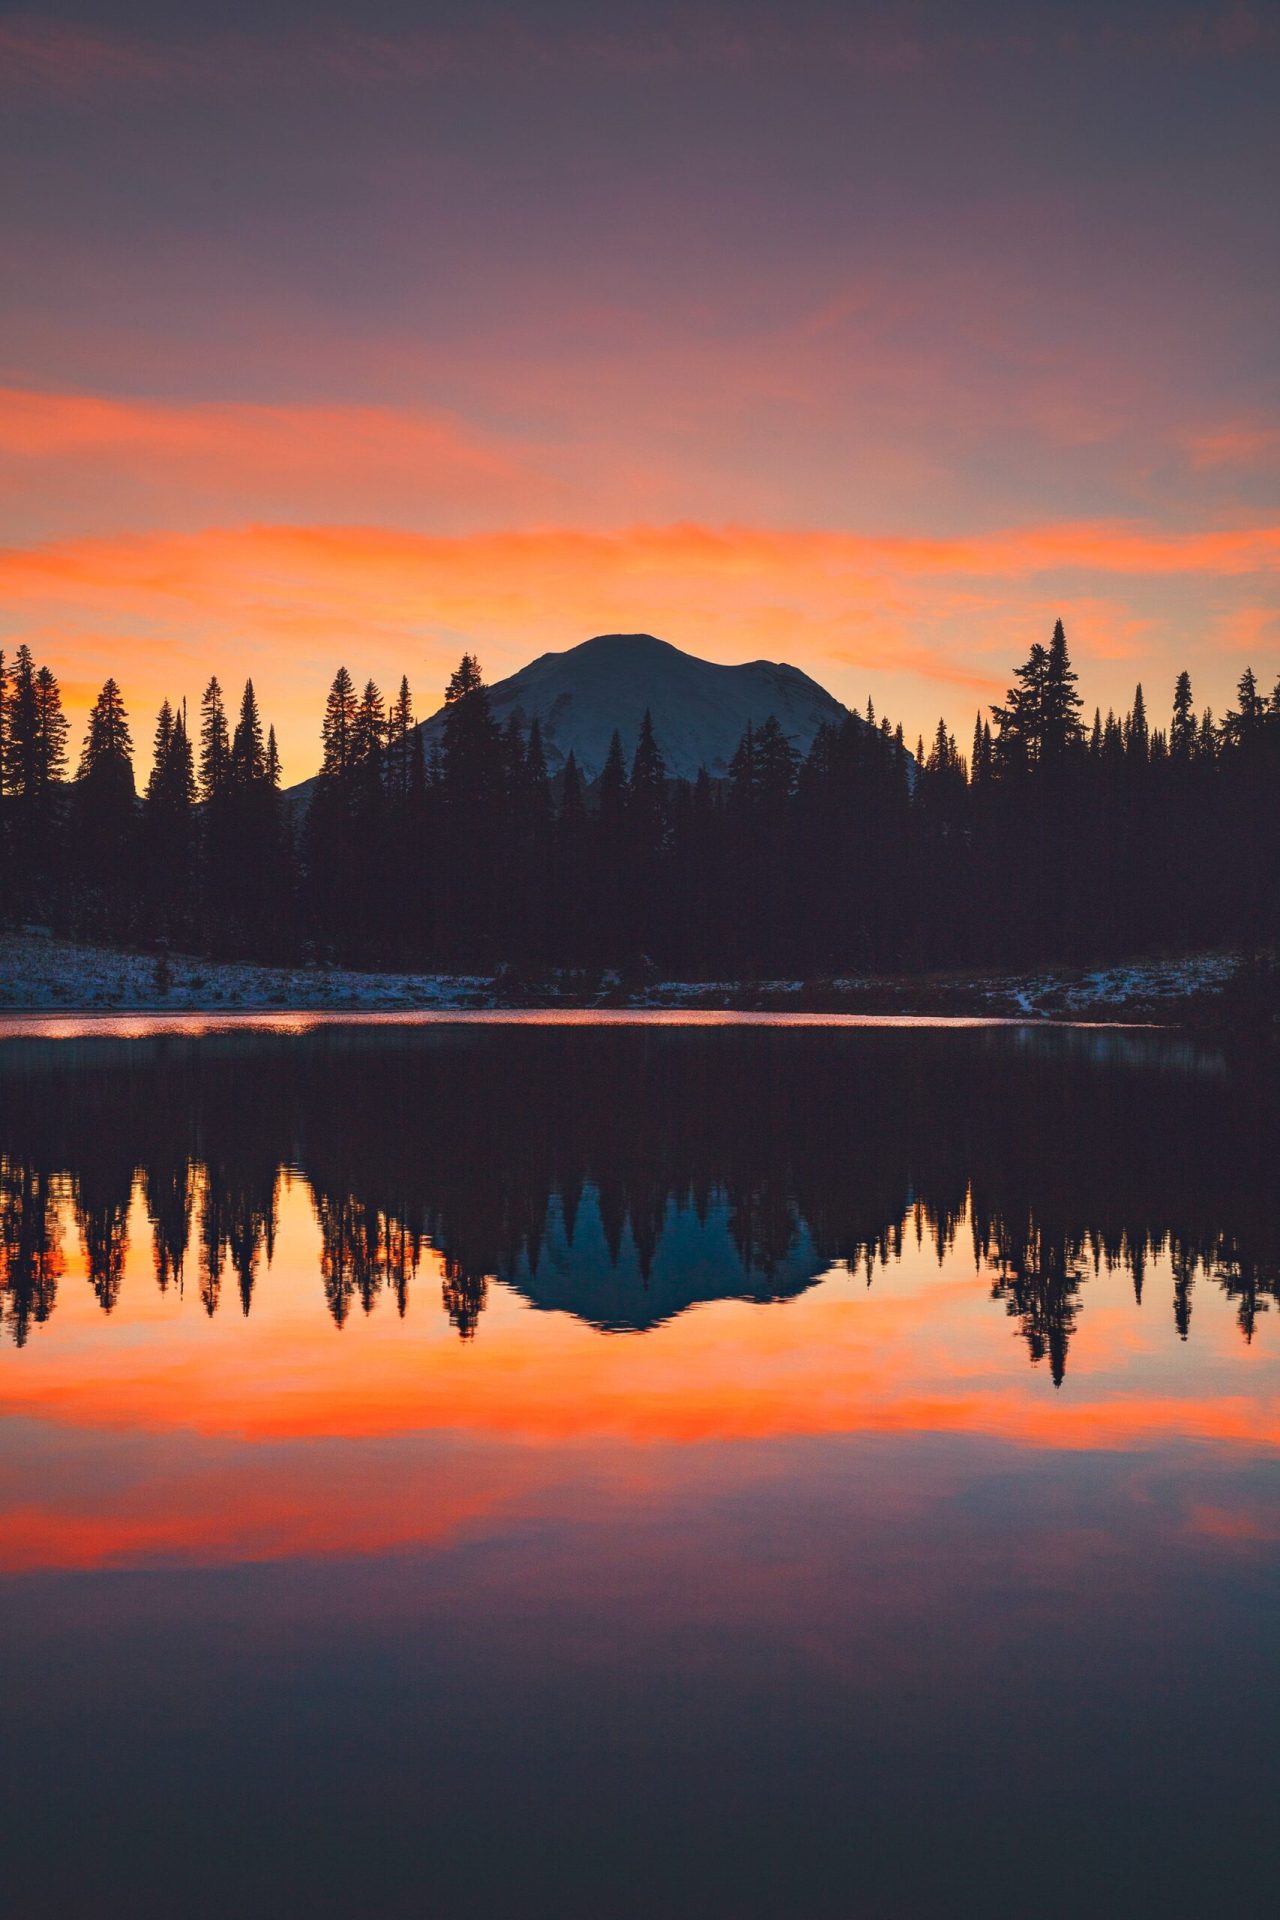 sunset image of trees and a mountain reflected in a lake